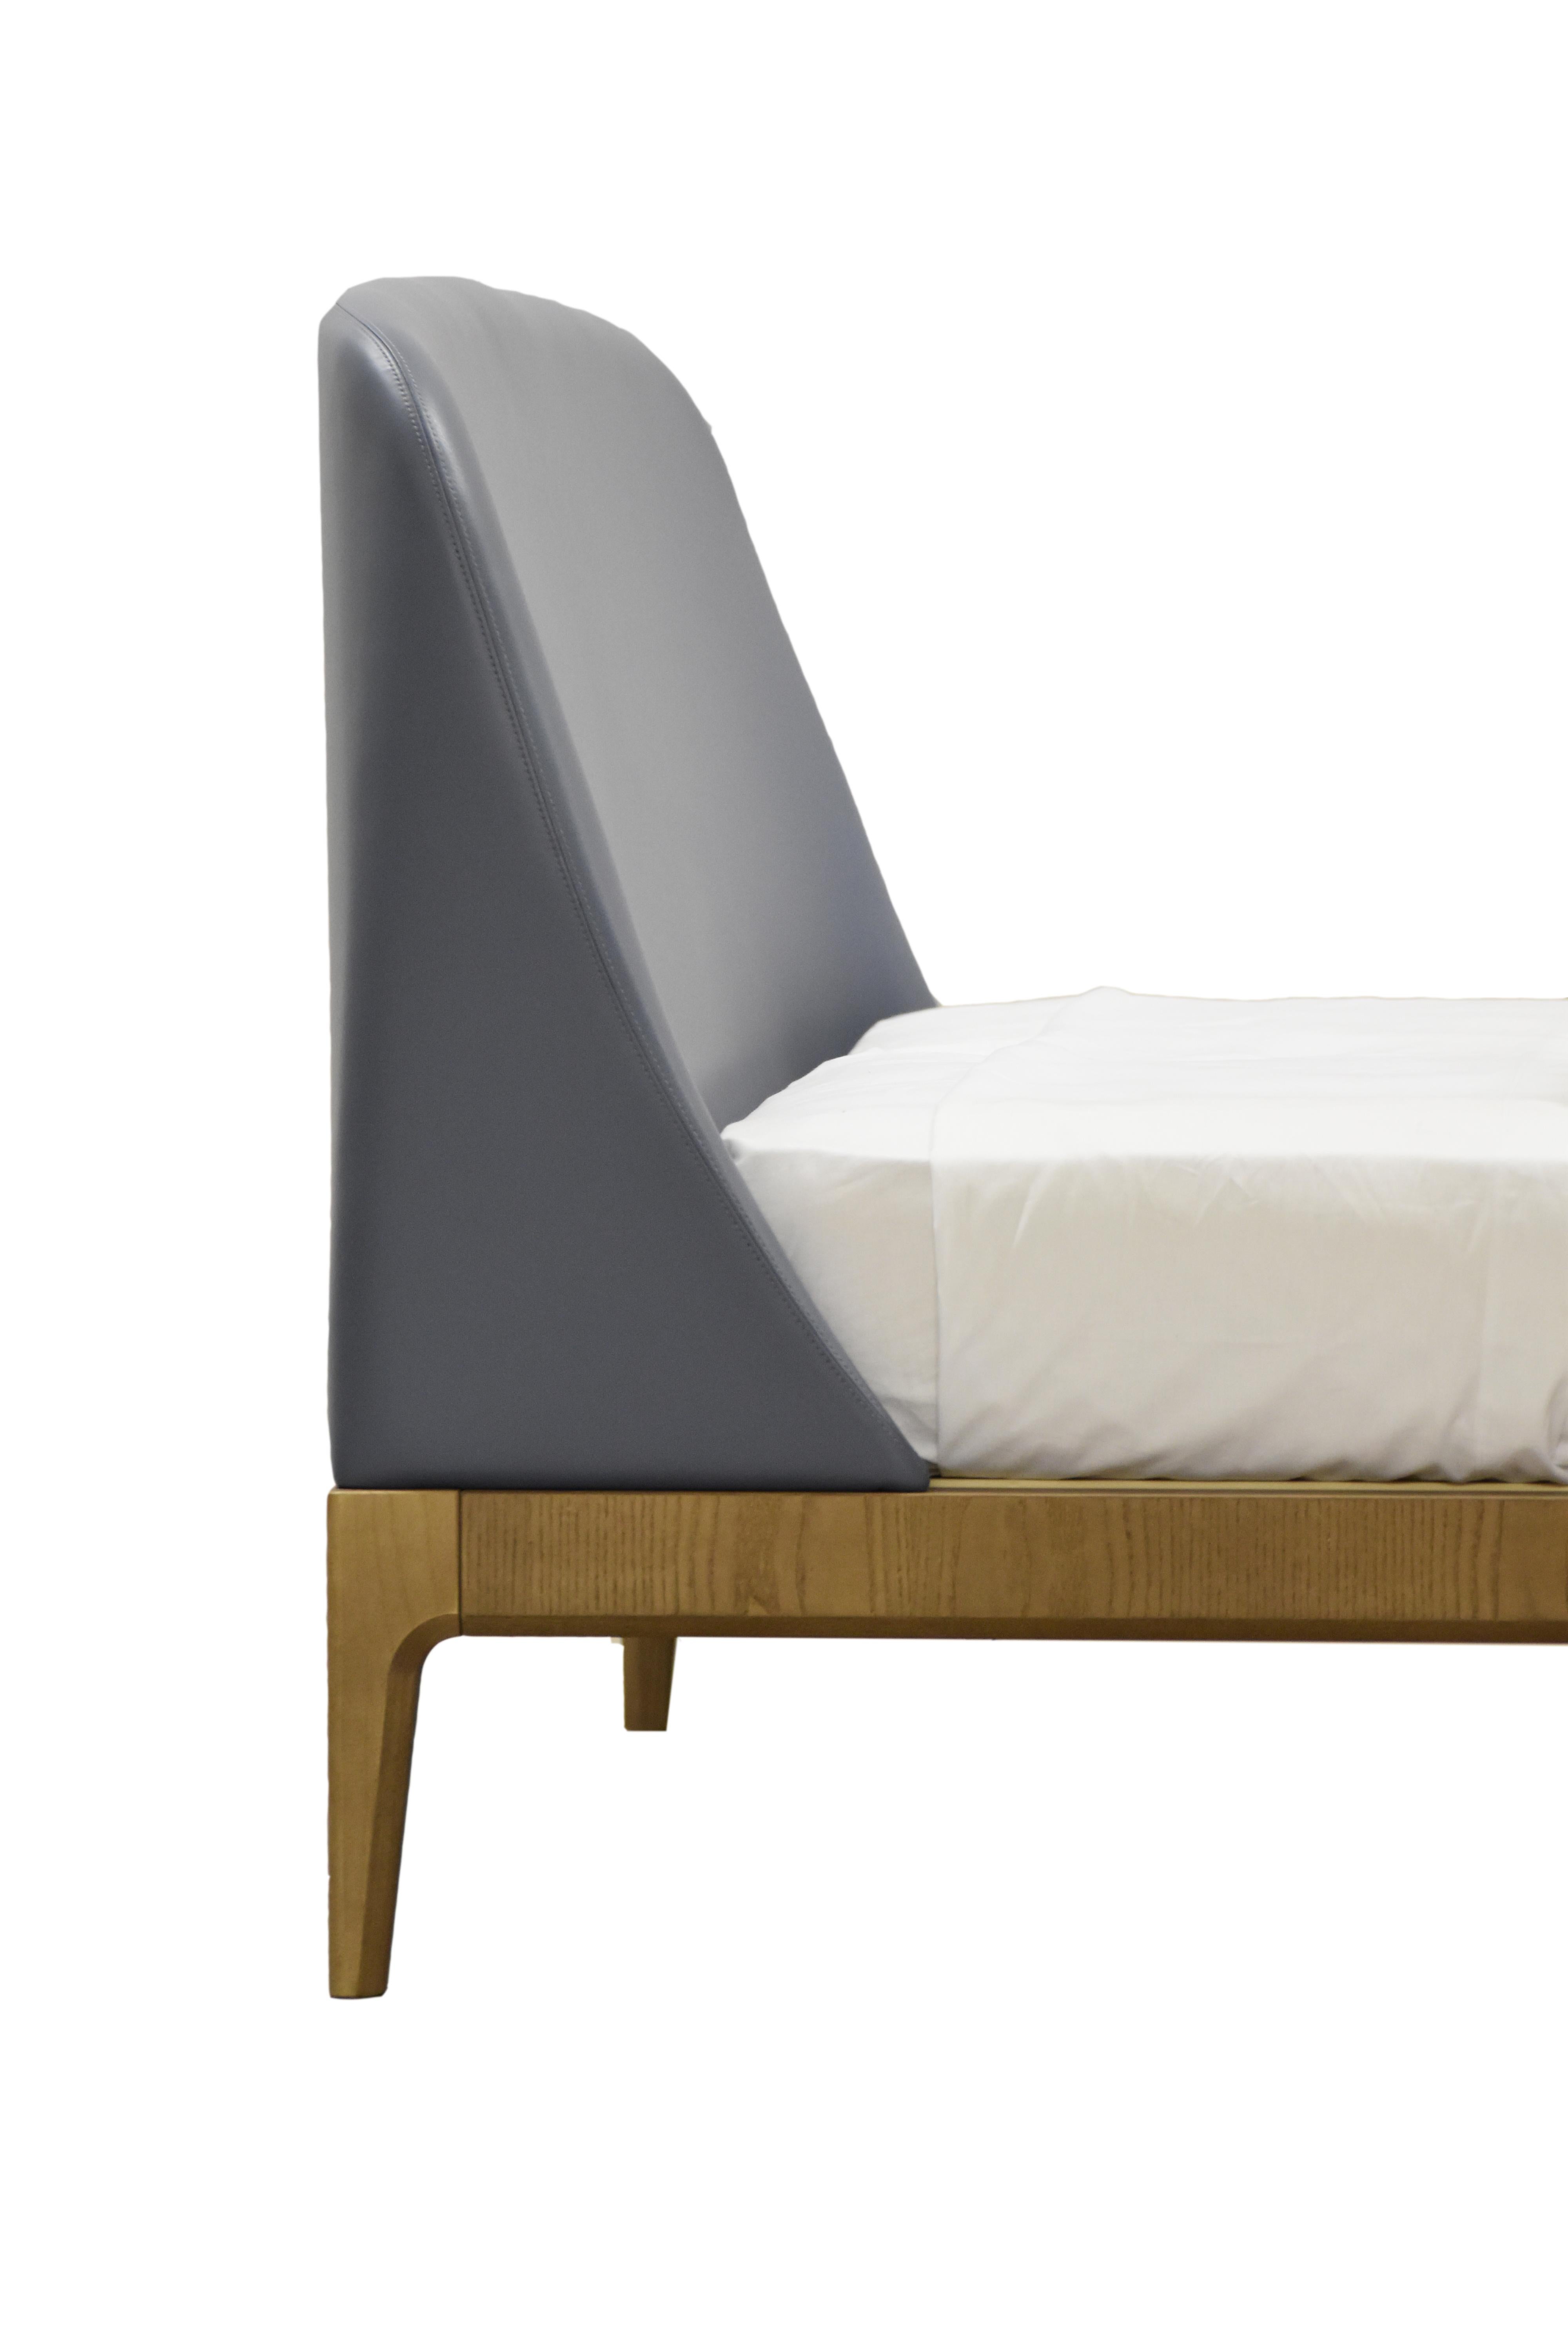 Bellagio Contemporary bed made of ashwood with leather or fabric upholstered headboard.
Available in different sizes (king, quuen, ...), as well as different finishes and coatings
Designed by Libero Rutilo
Made in Italy by Morelato